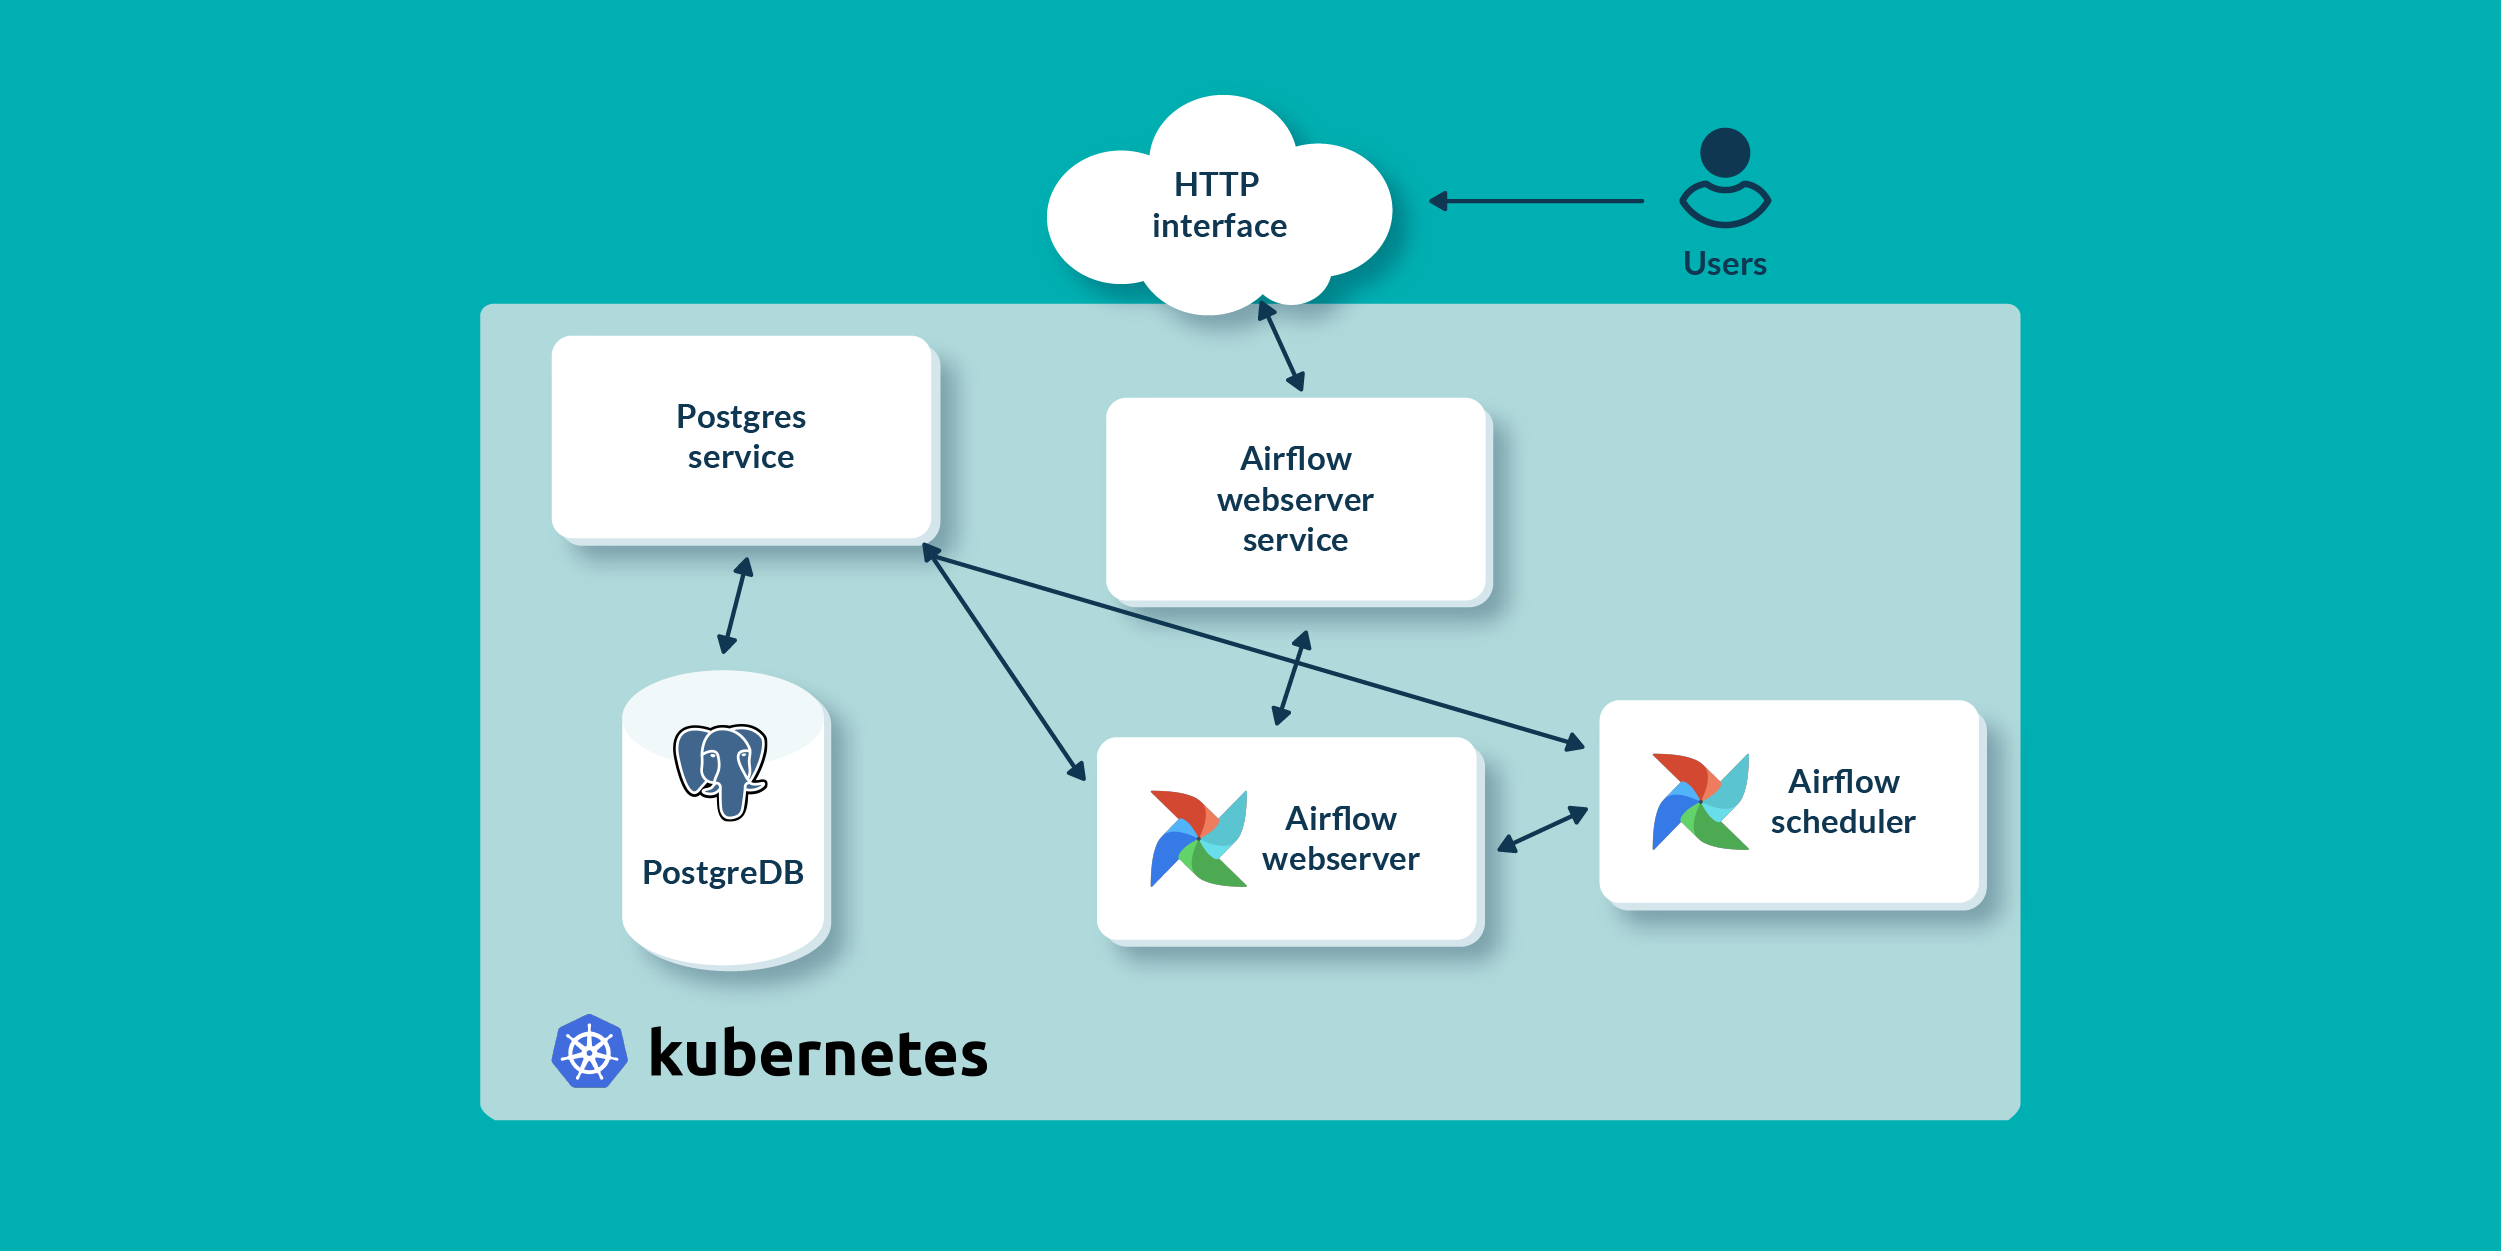 Deploying Apache Airflow on a Kubernetes Cluster